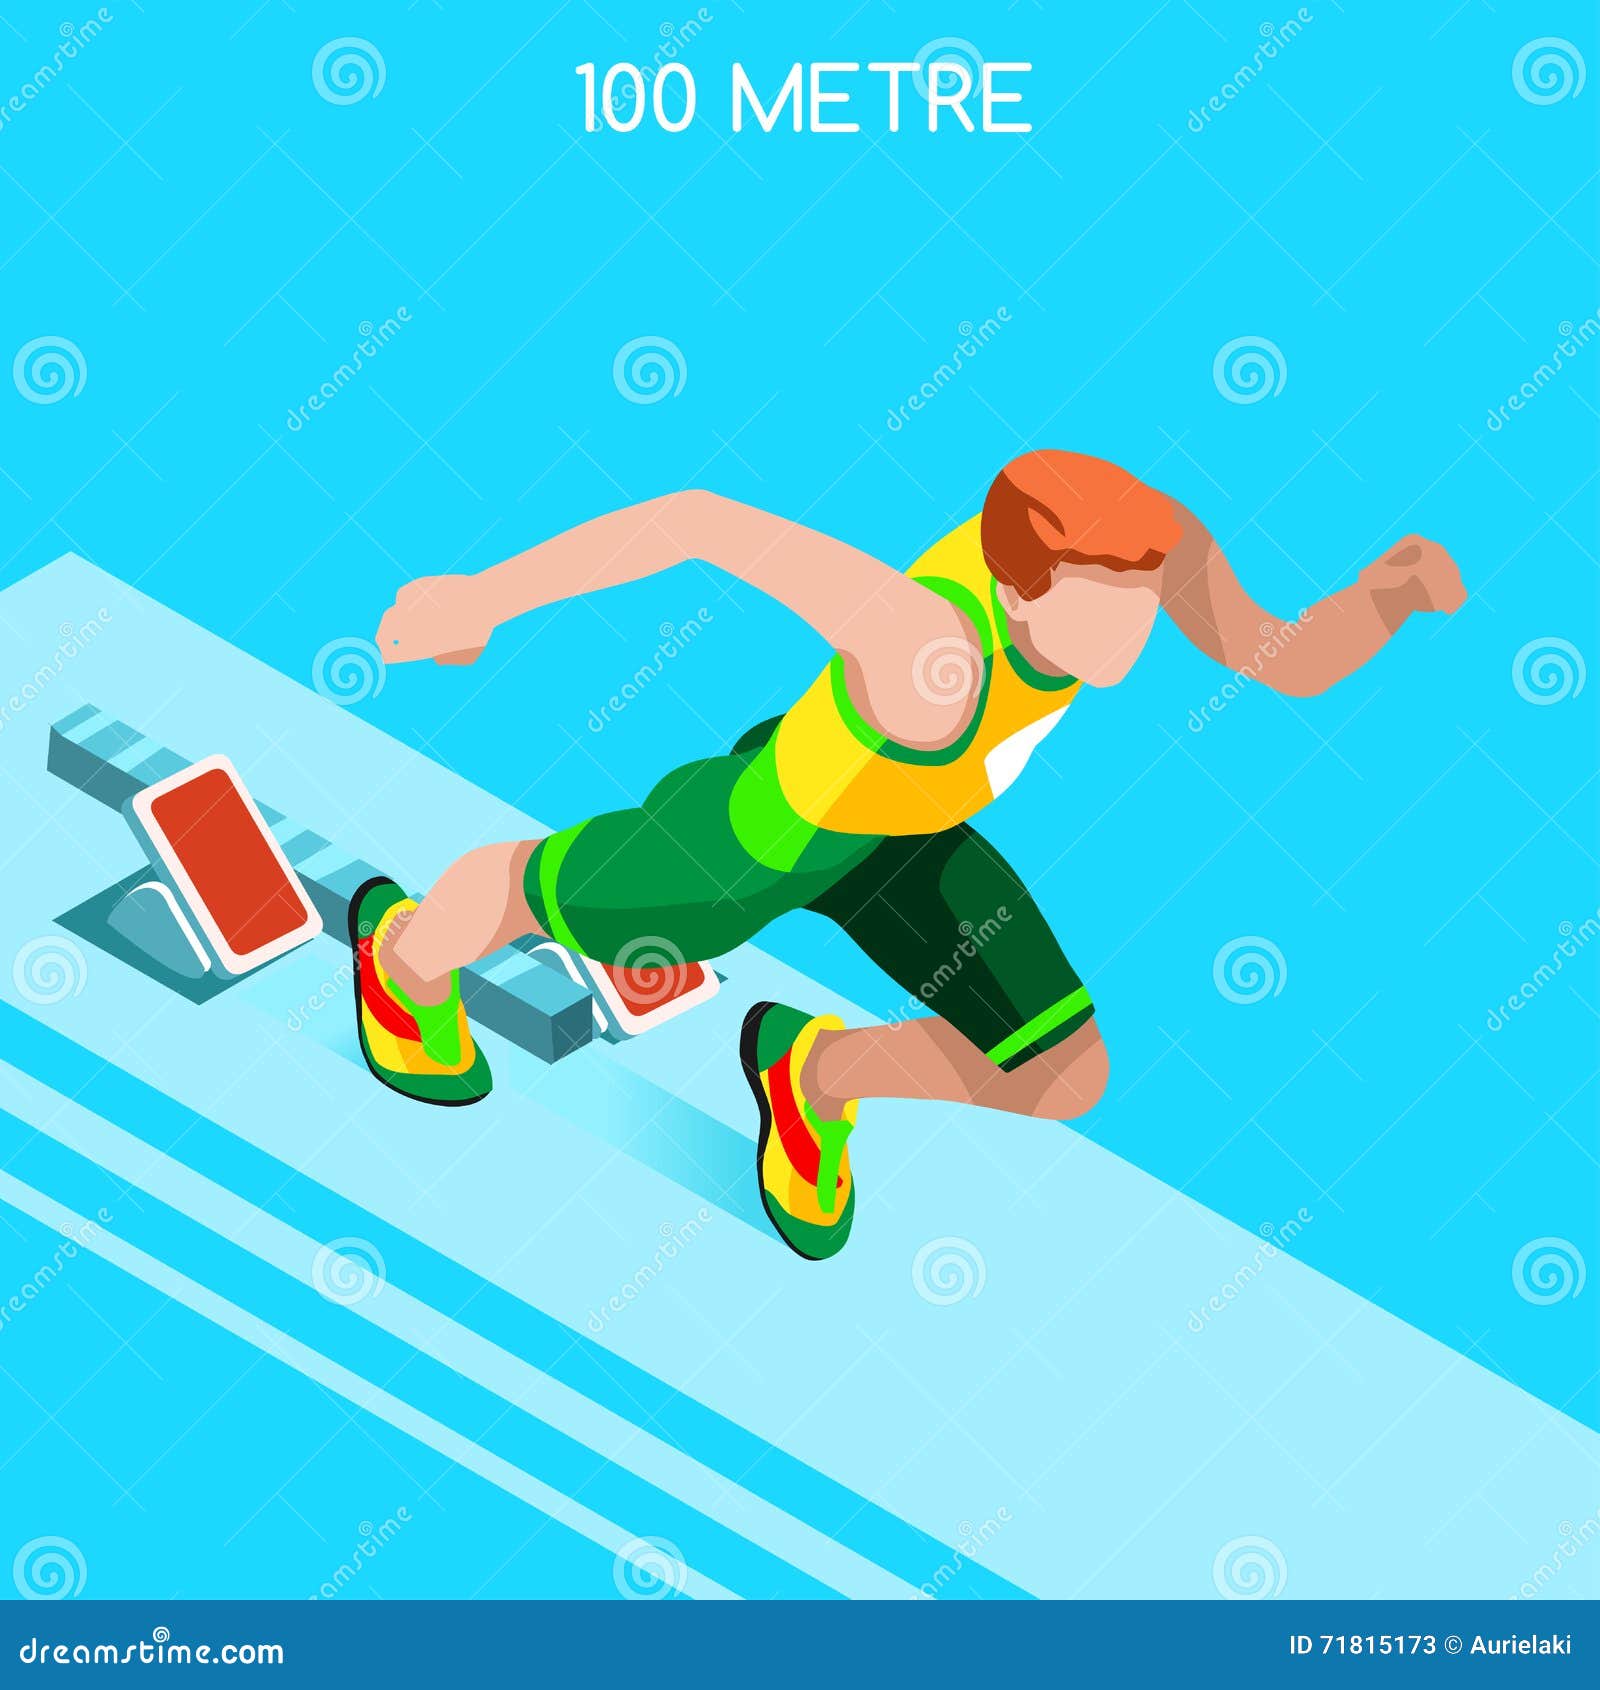 Middeleeuws Omleiding Hoe Running 100 Metres Dash of Athletics Summer Games Icon Set.Speed Concept.3D  Isometric Athlete Stock Vector - Illustration of championship, advantage:  71815173